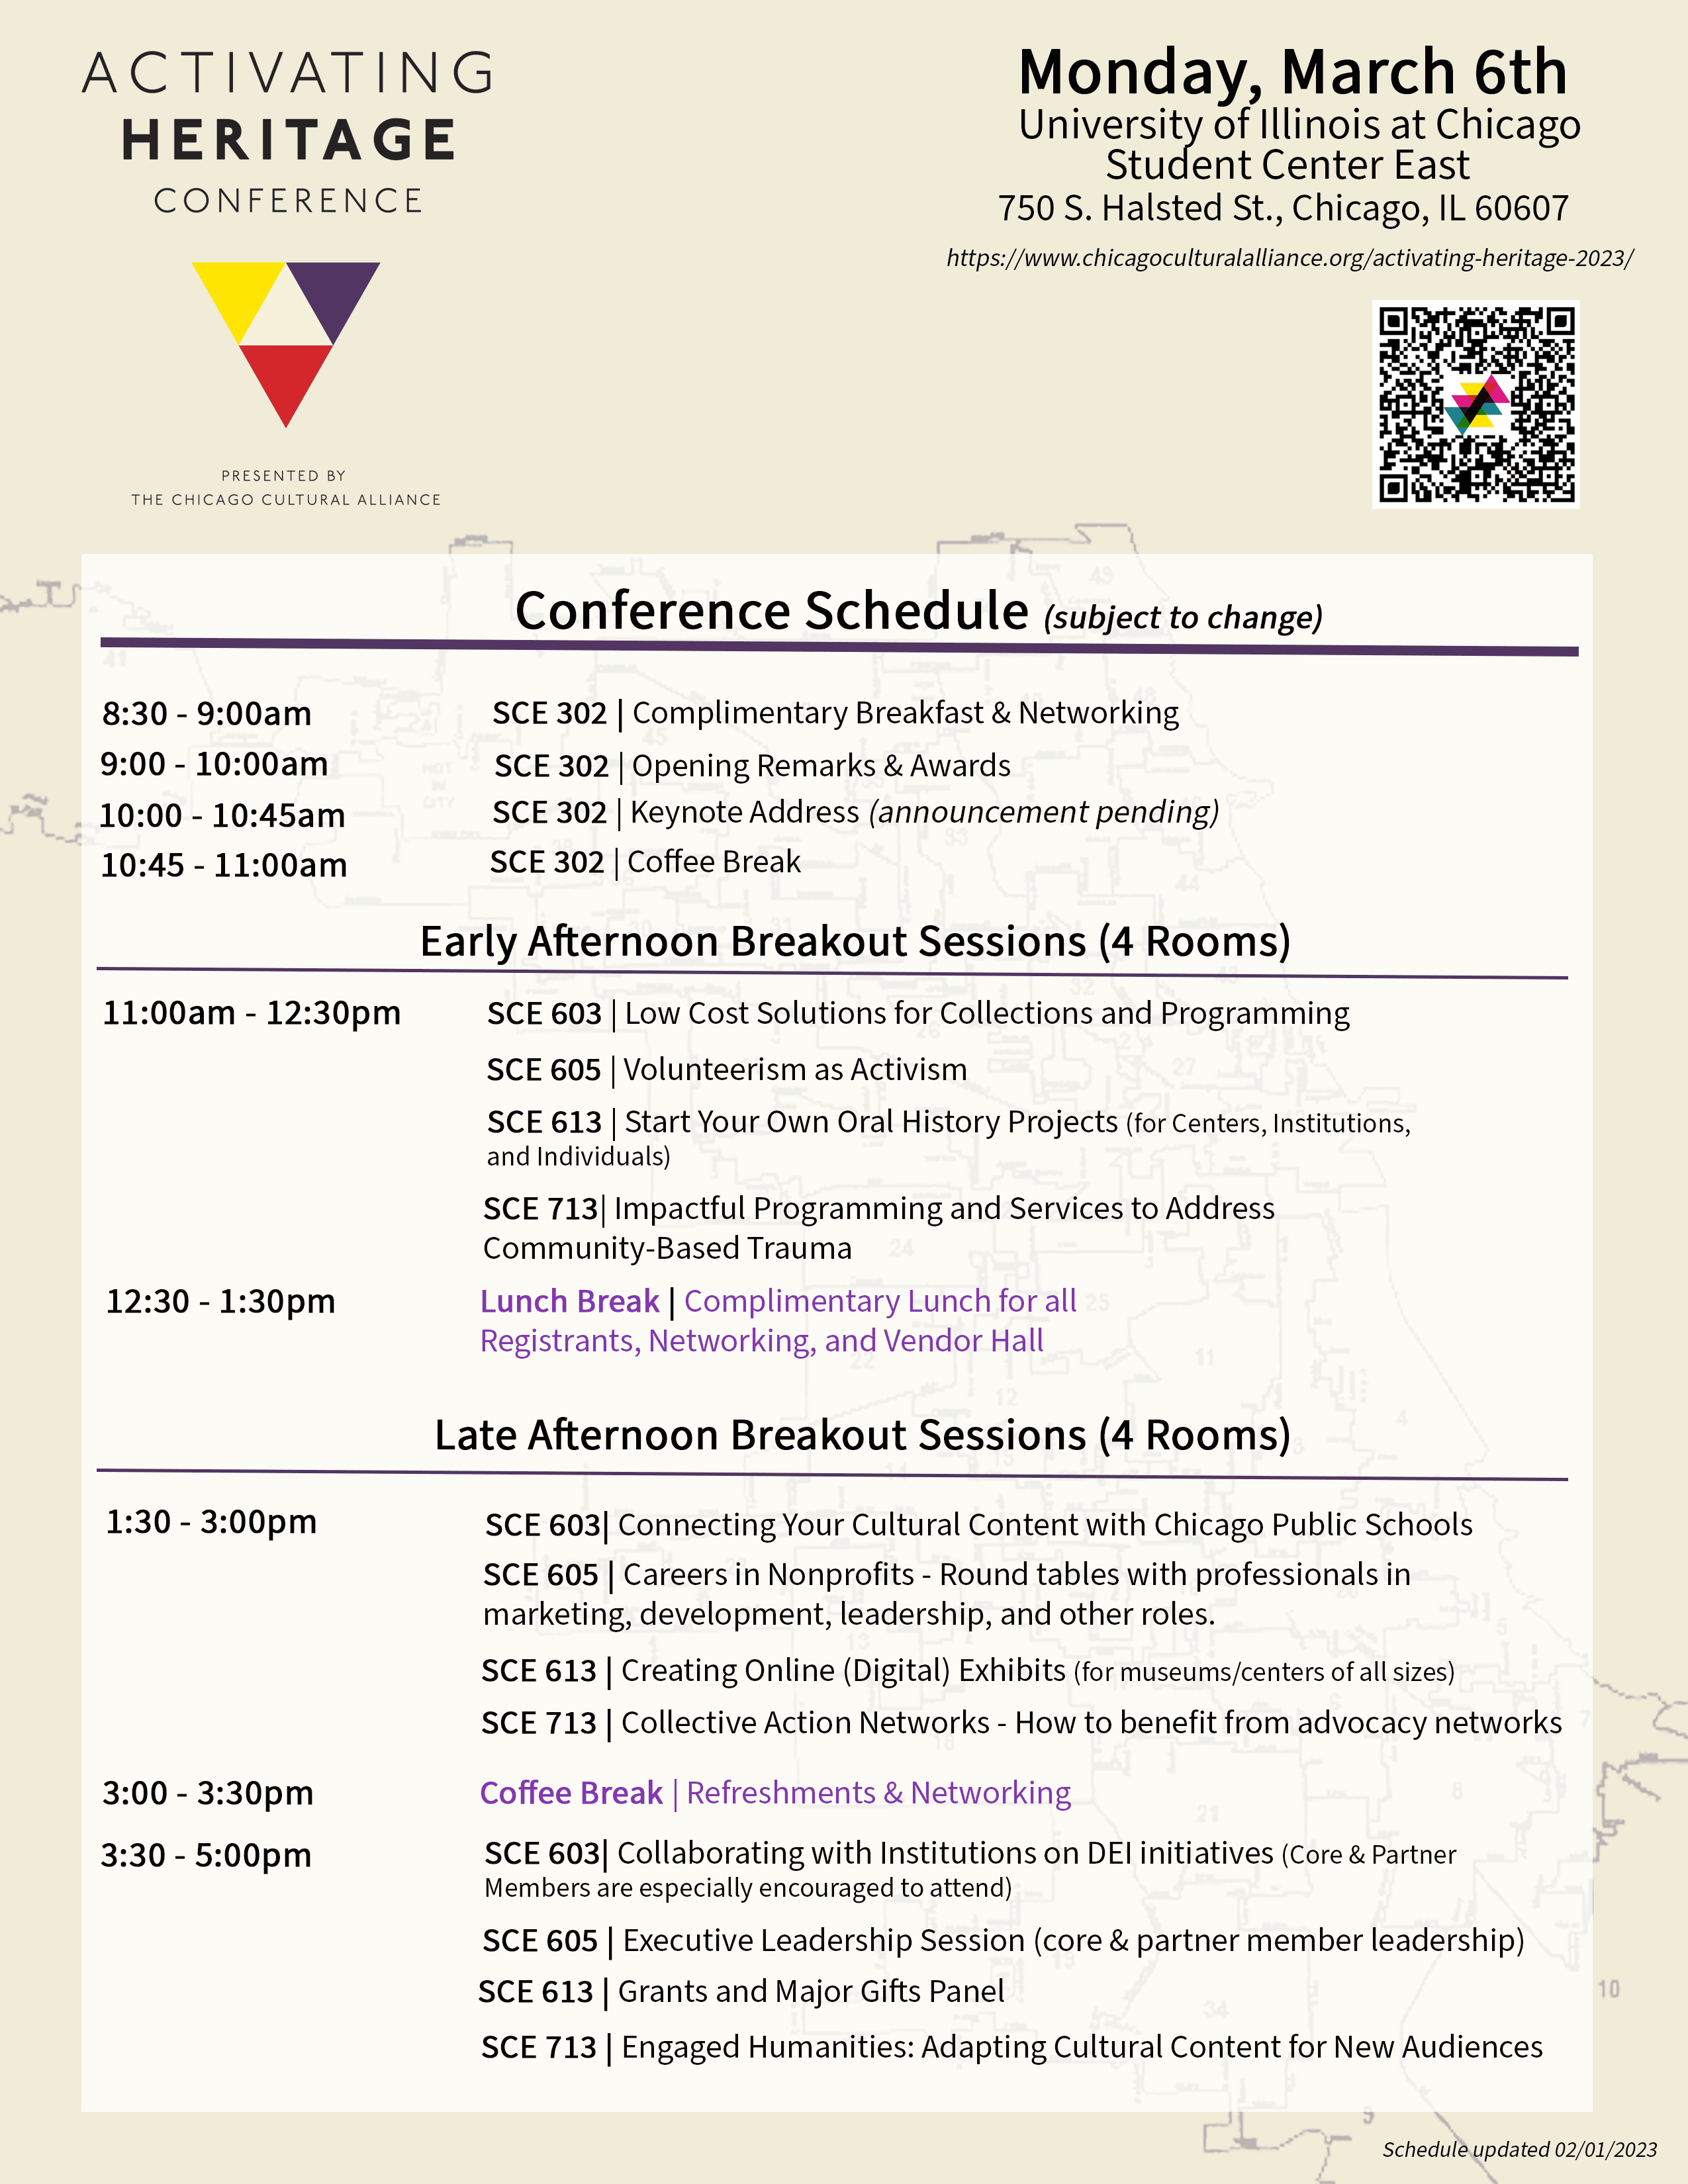 Conference Schedule for Activatin